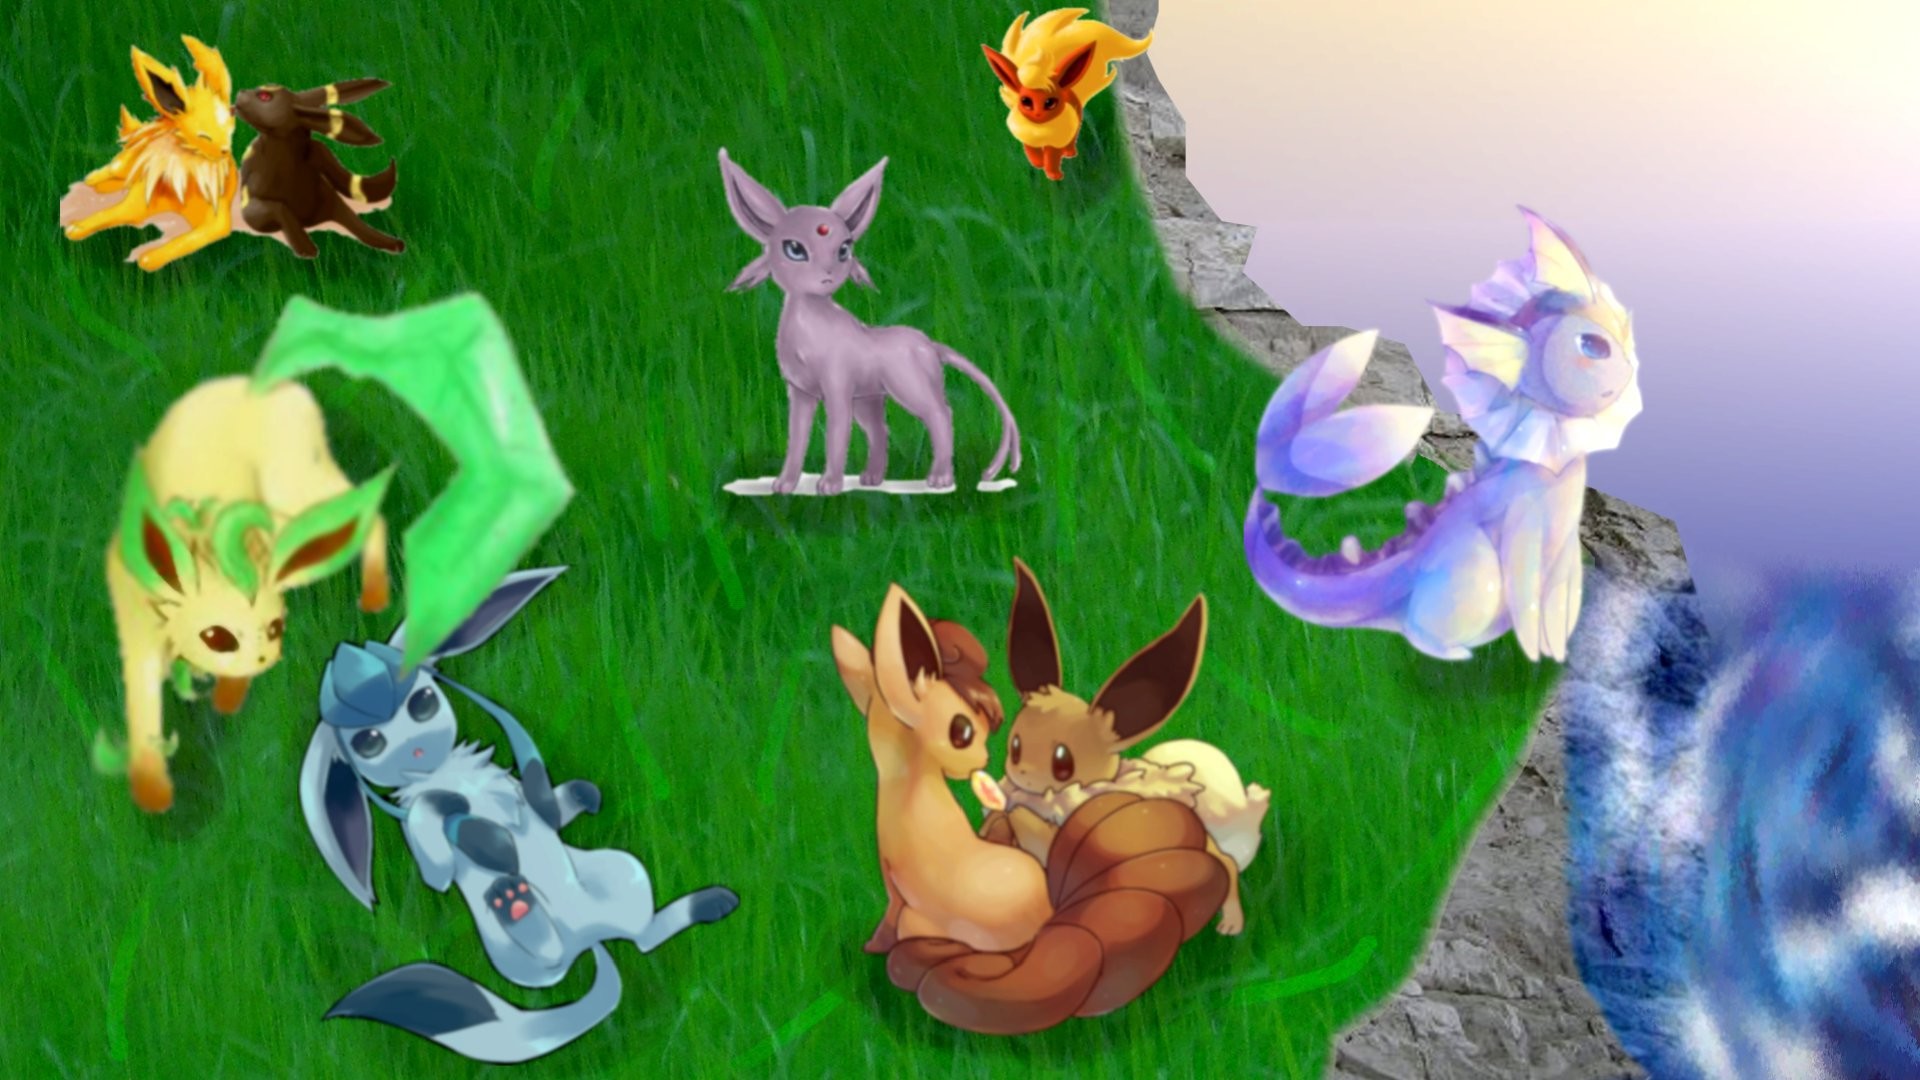 … Eevee and his evolutions with Vulpix by Valyli